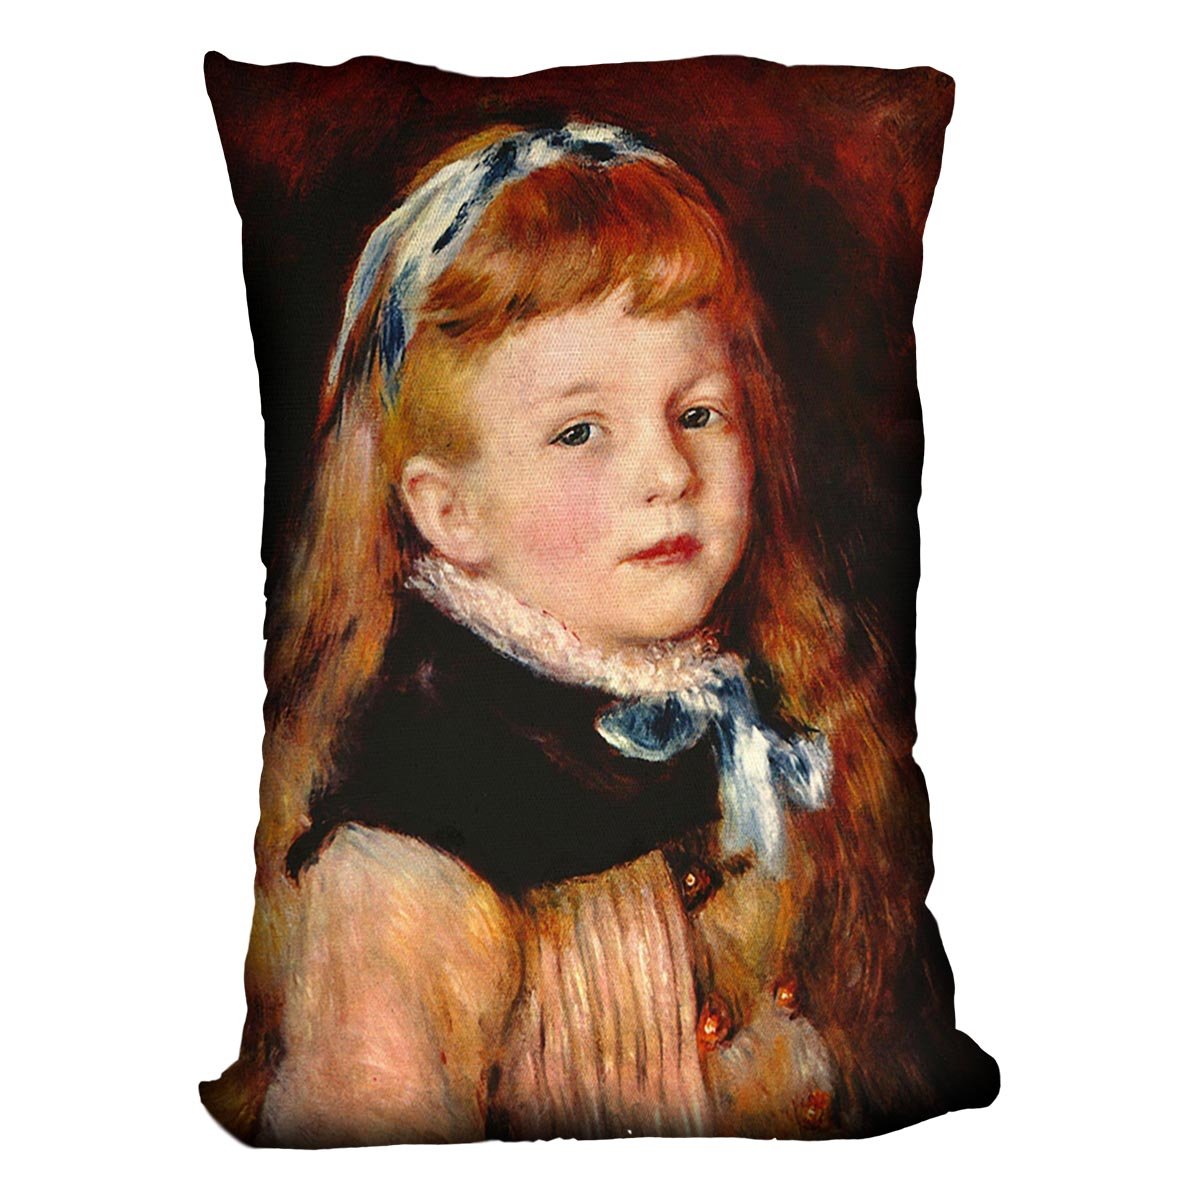 Mademoiselle Grimprel with blue hair band by Renoir Throw Pillow